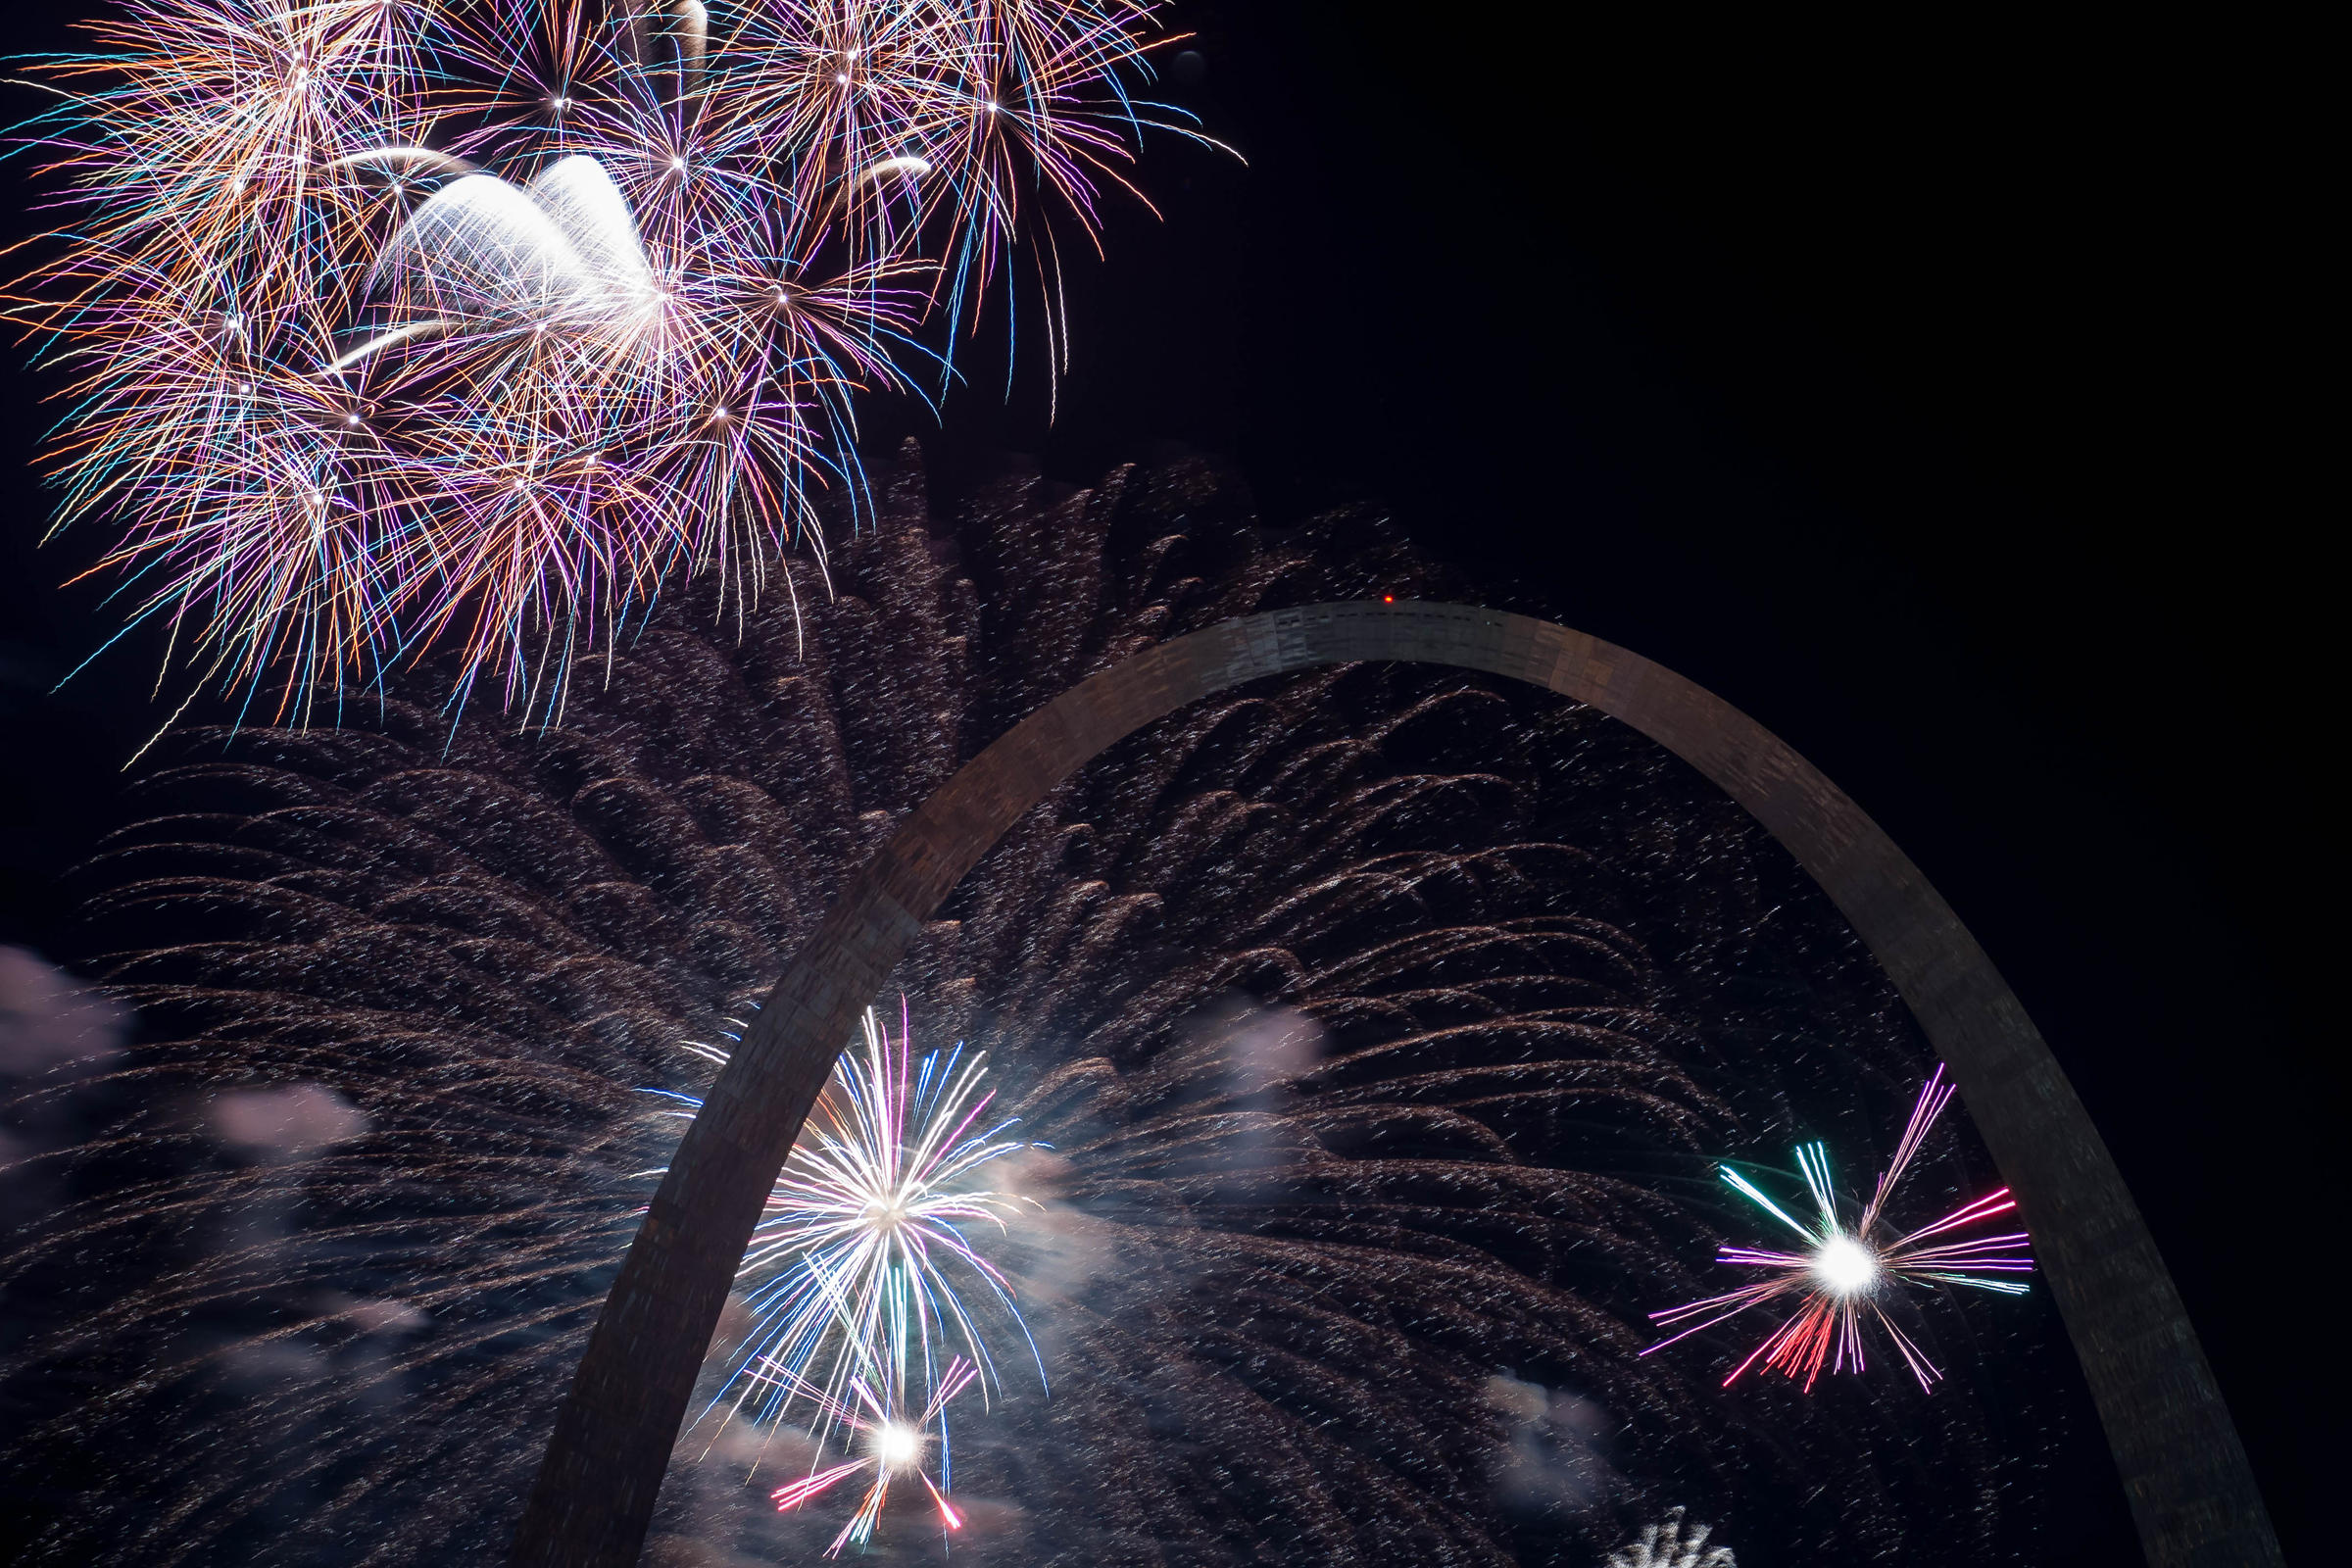 With Few St. Louis-Area Fireworks Shows, July Fourth Weekend Looks Different | KBIA